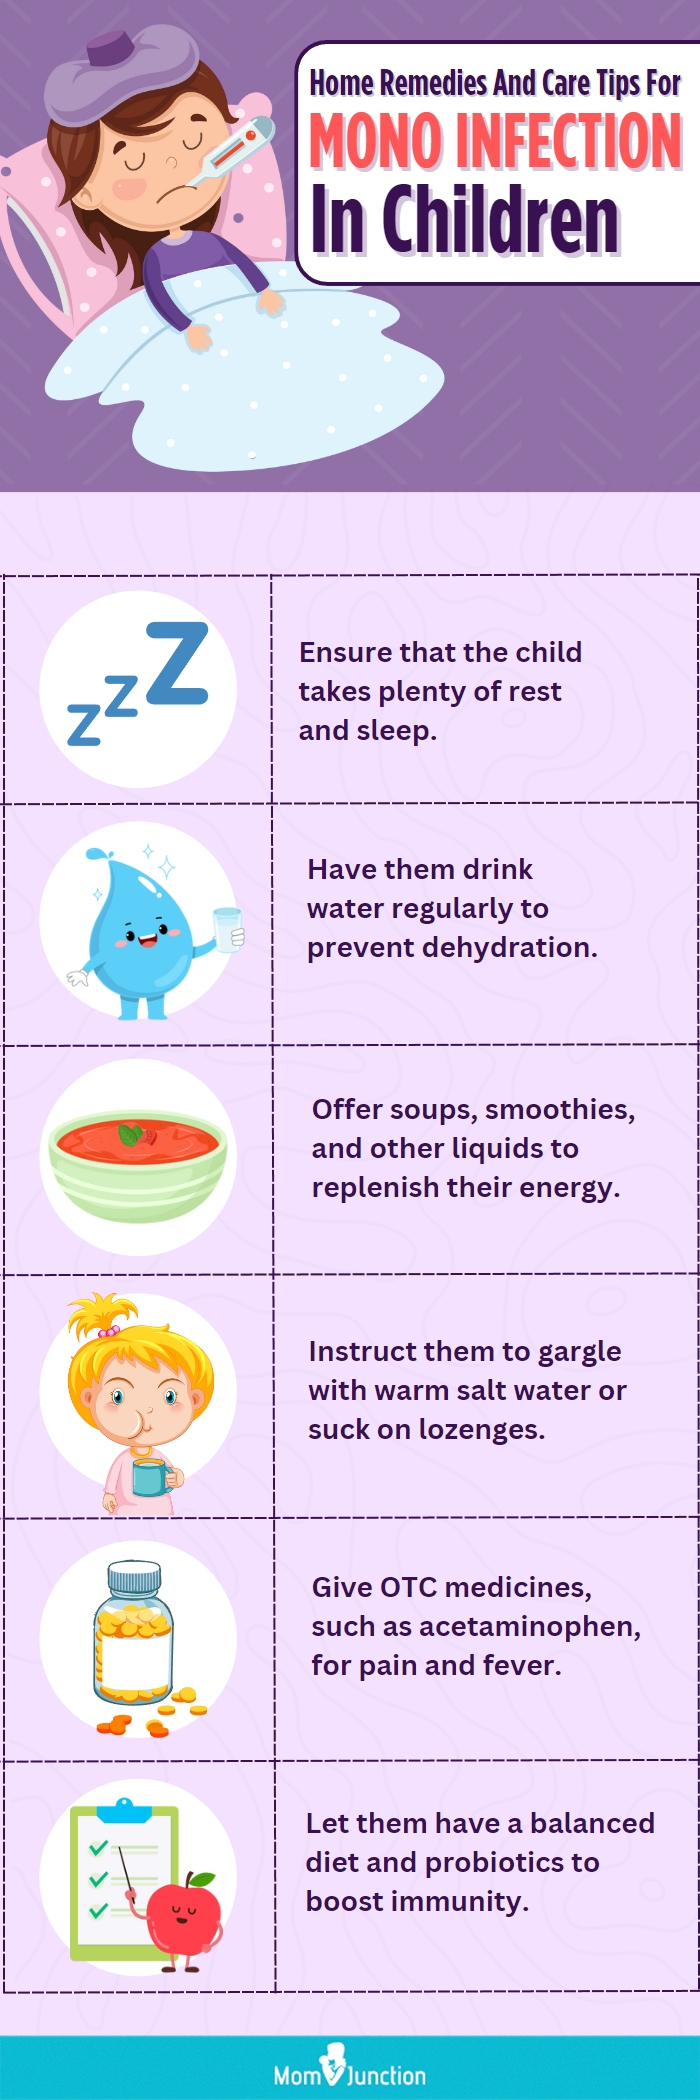 home remedies and care tips for mono infection in children (infographic)